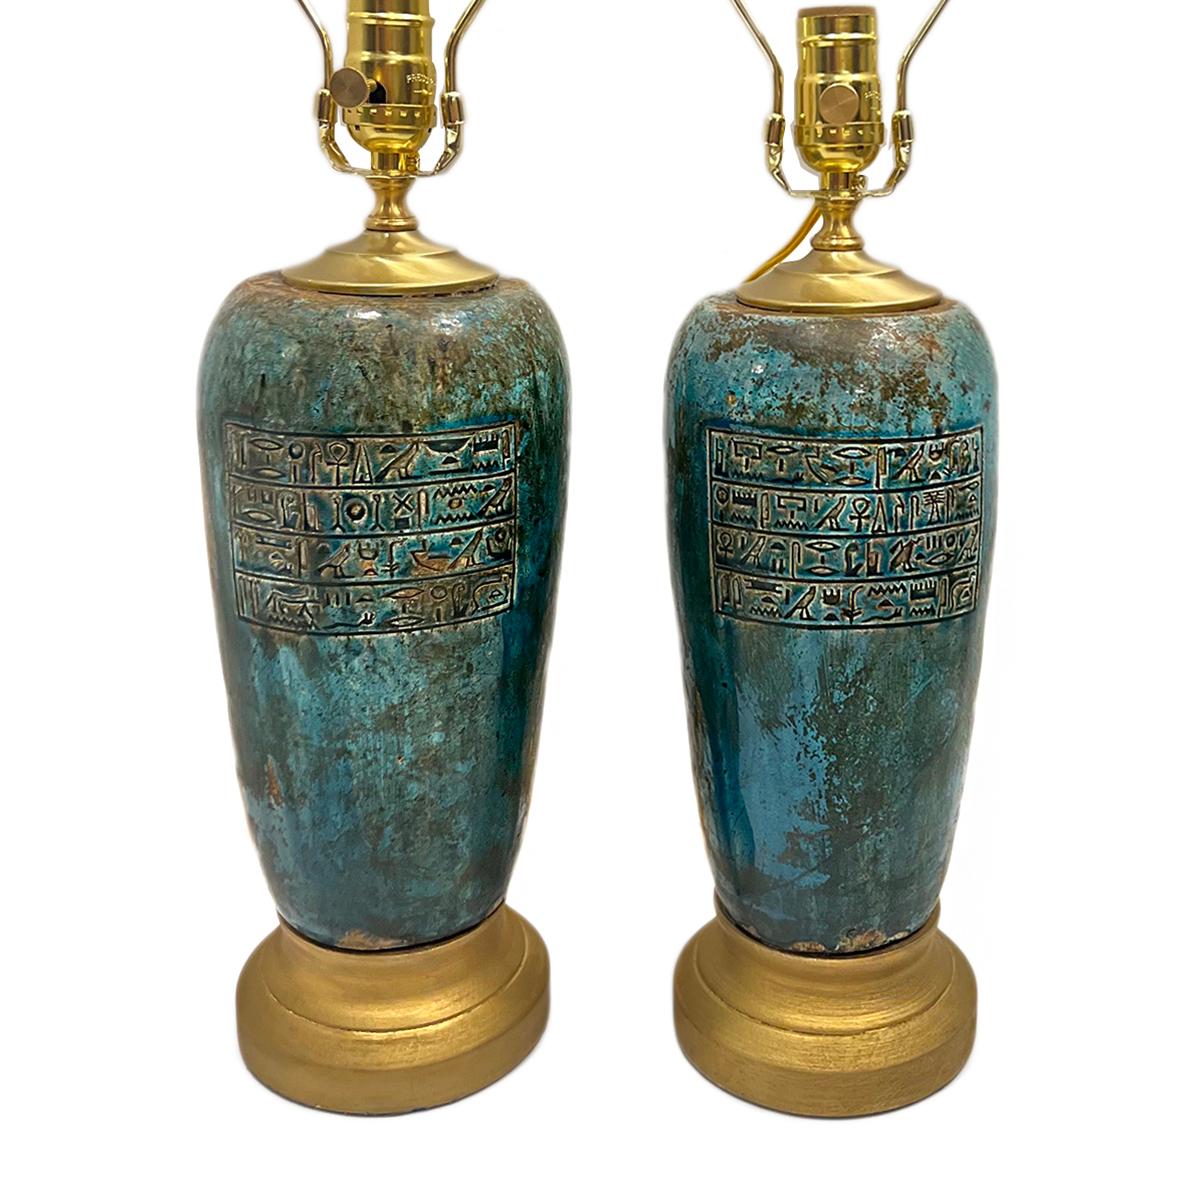 Pair of 1950's turquoise marble table lamps with hieroglyphic motif.

Measurements:
Height of body: 14